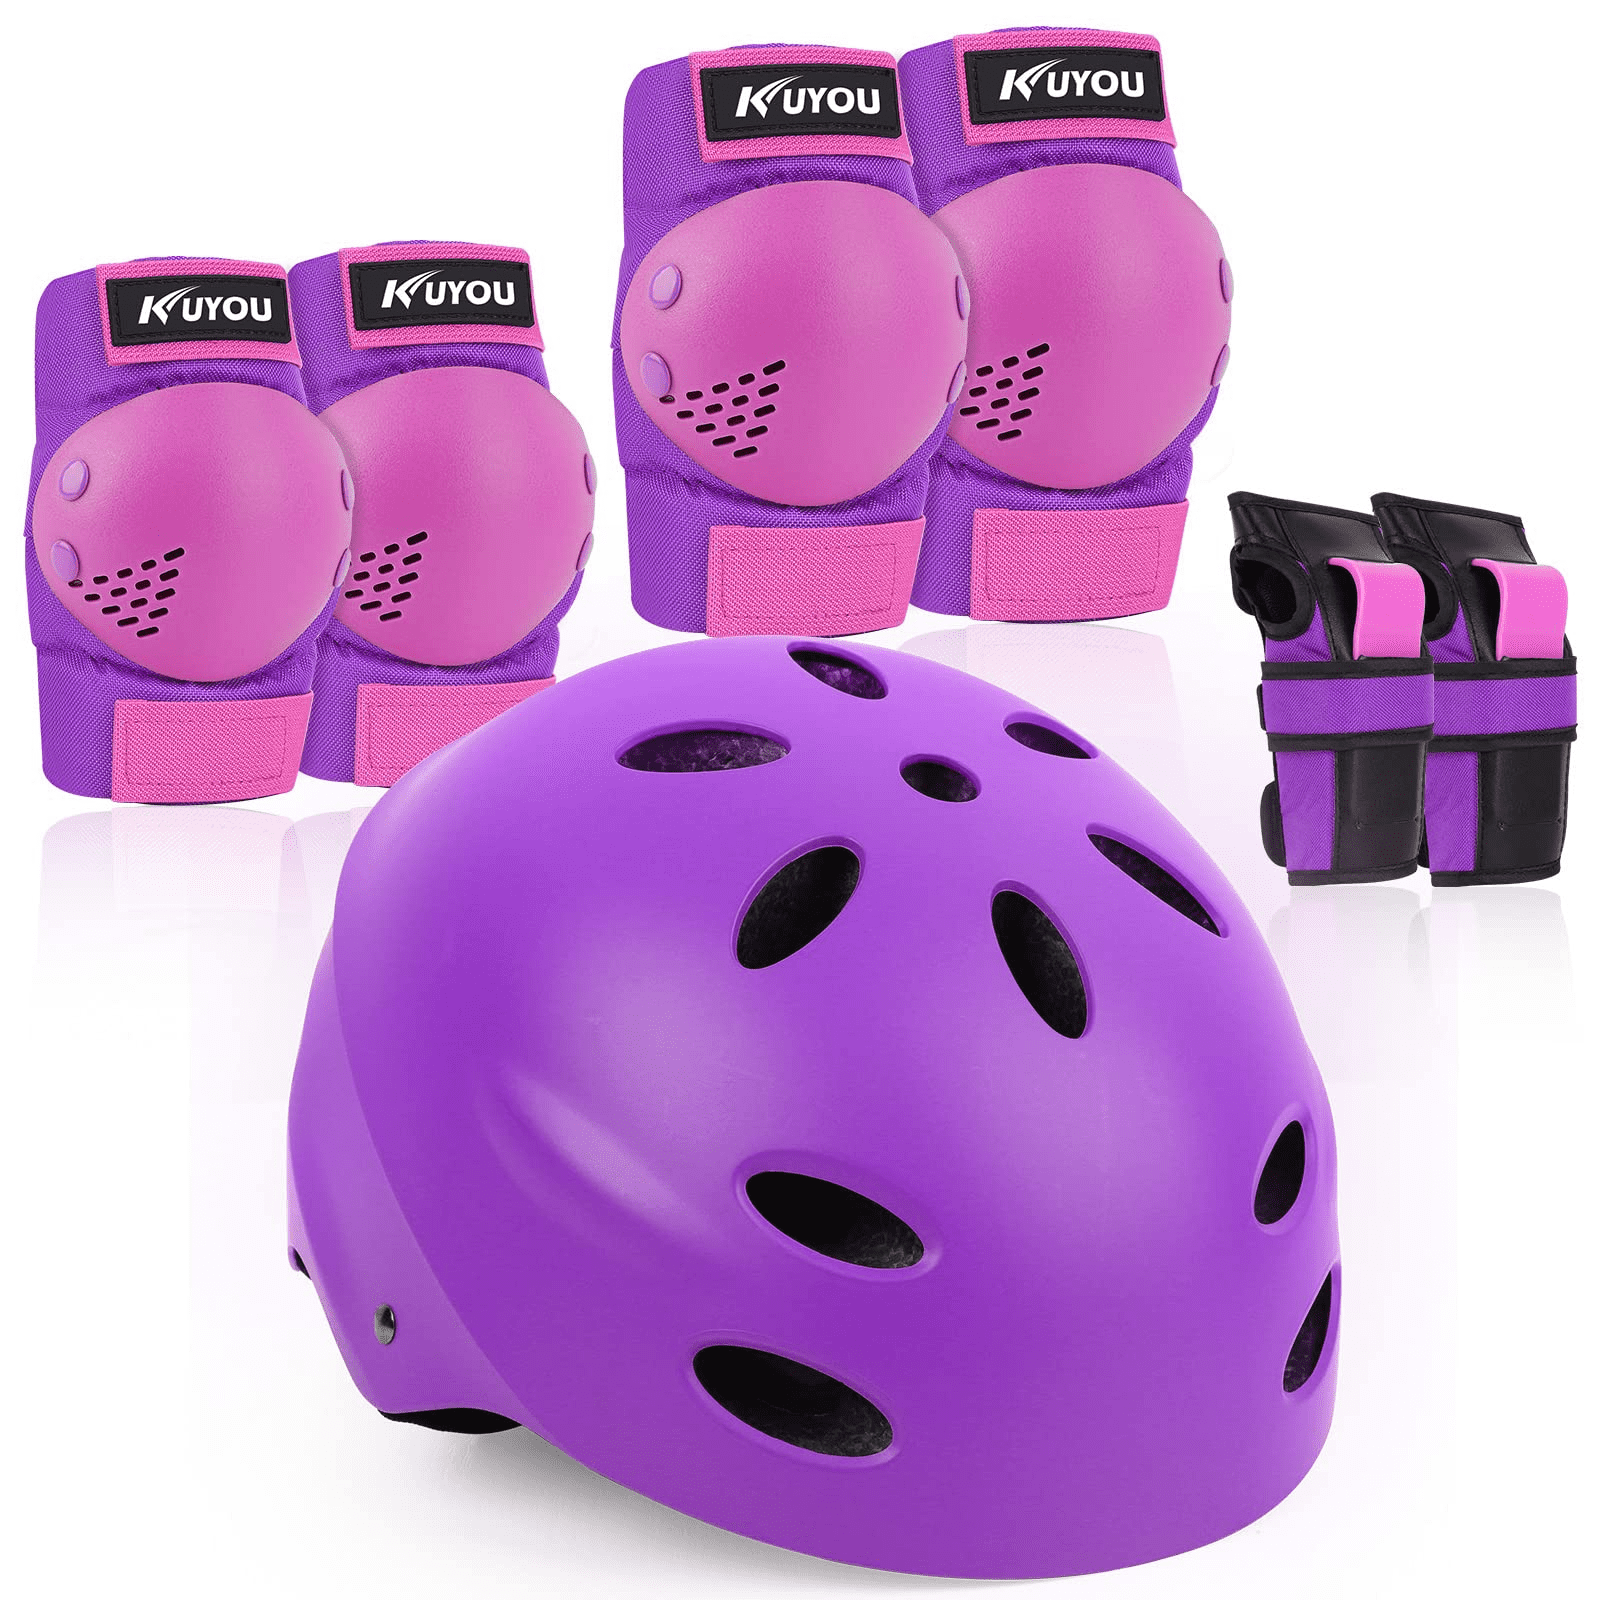 Kuyou Childs Helmet With Adjustable Size ABS Shell for Skateboard Ski Skating Roller Protective Gear Suitable Kids and Youth